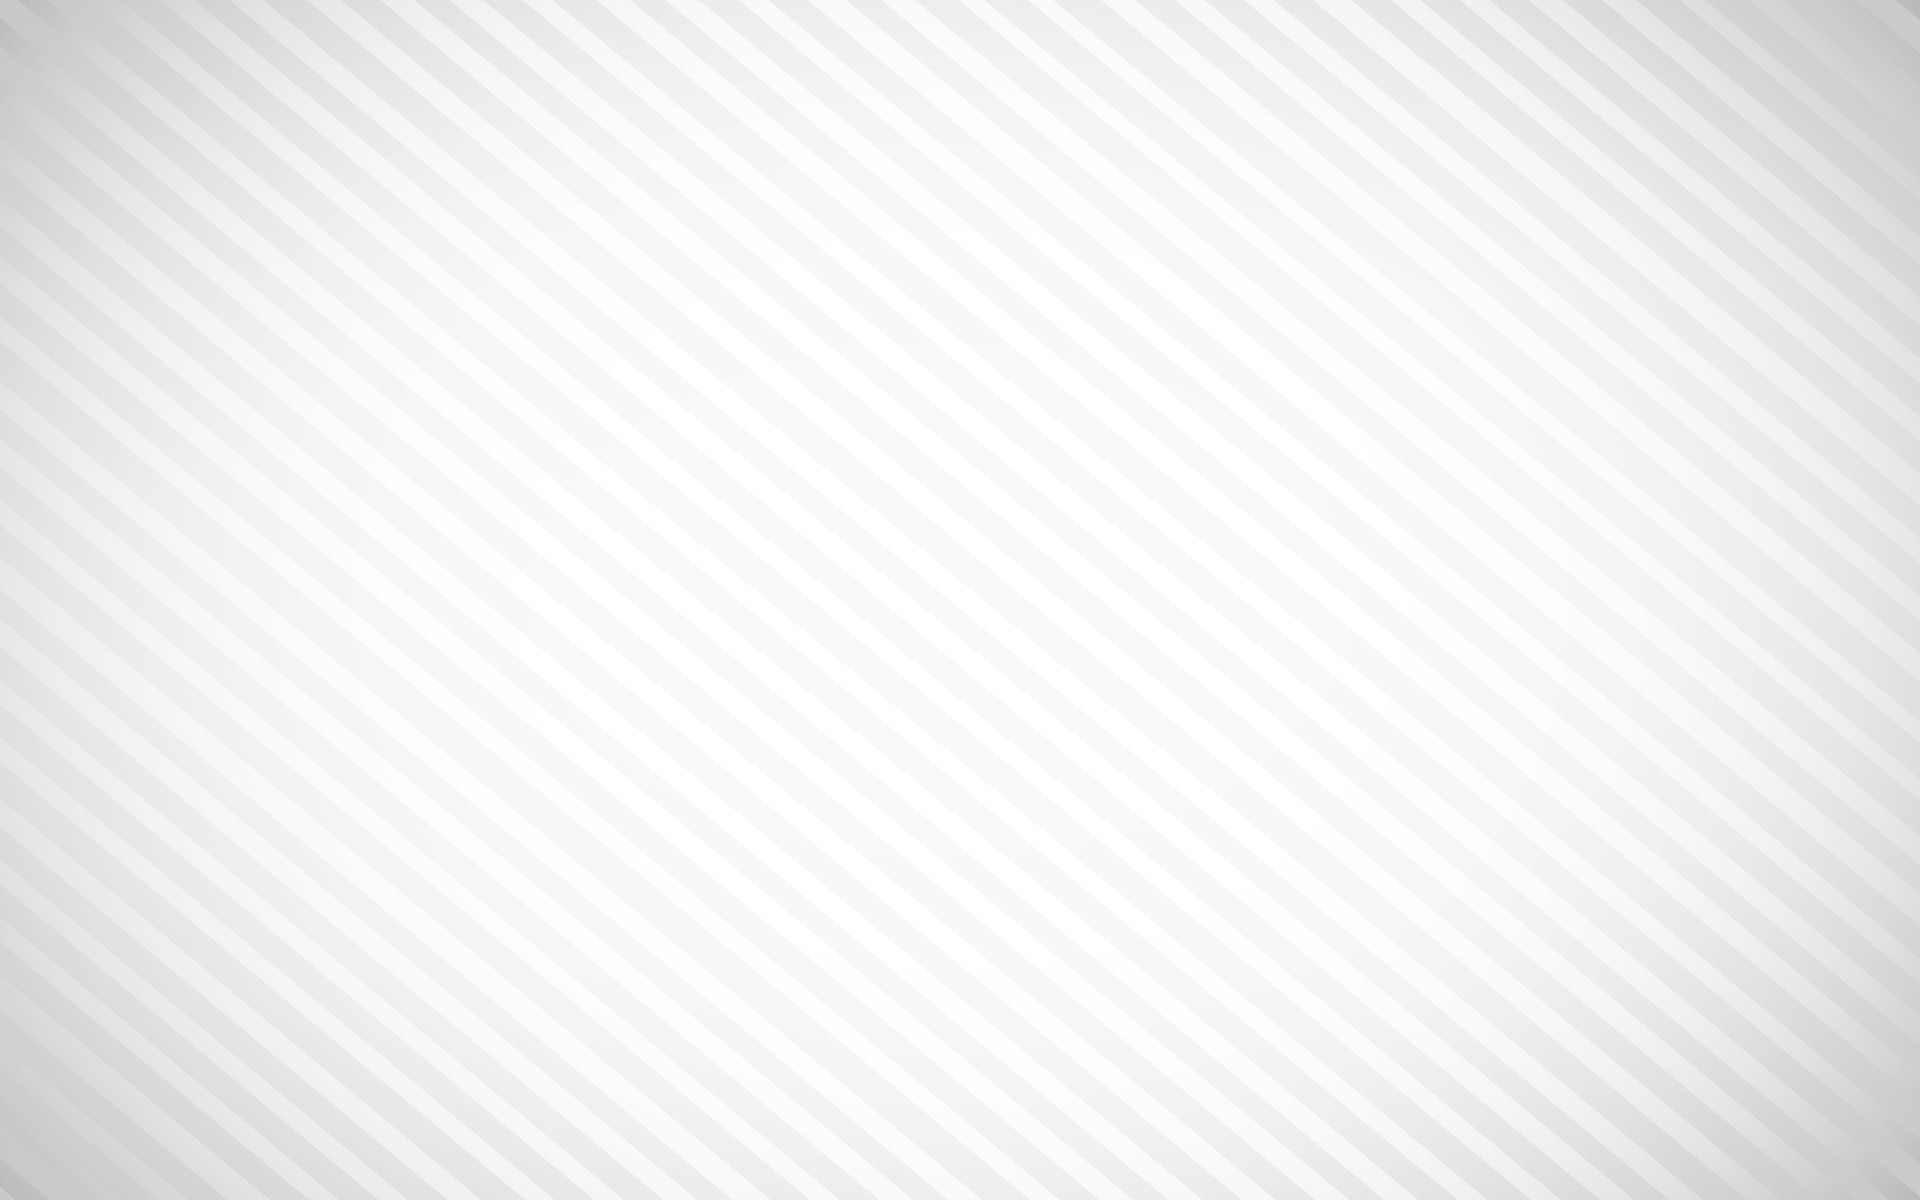 347098-white-background-hd-1920x1200-hd-1080p - SNP GROUP OF COMPANIES